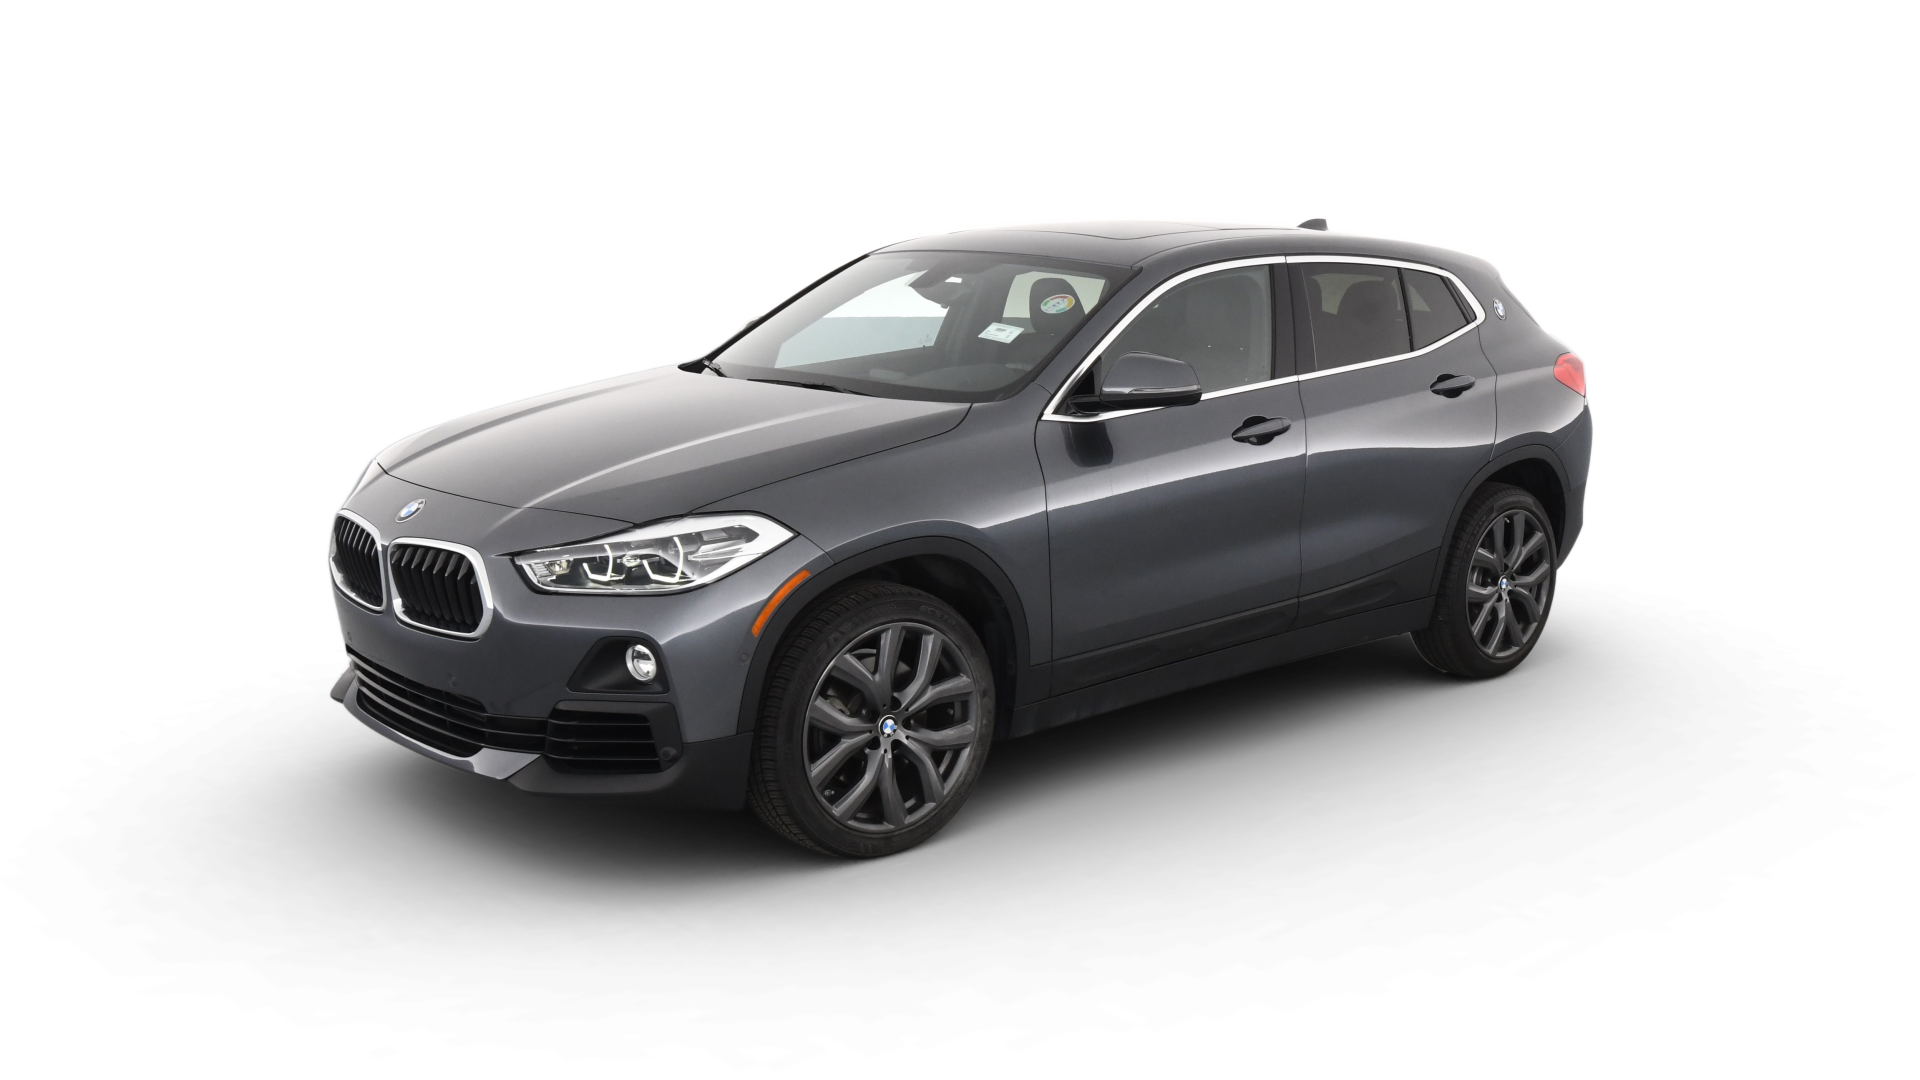 2019 Used BMW X2 xDrive28i M-SPORT at Michaels Autos Serving